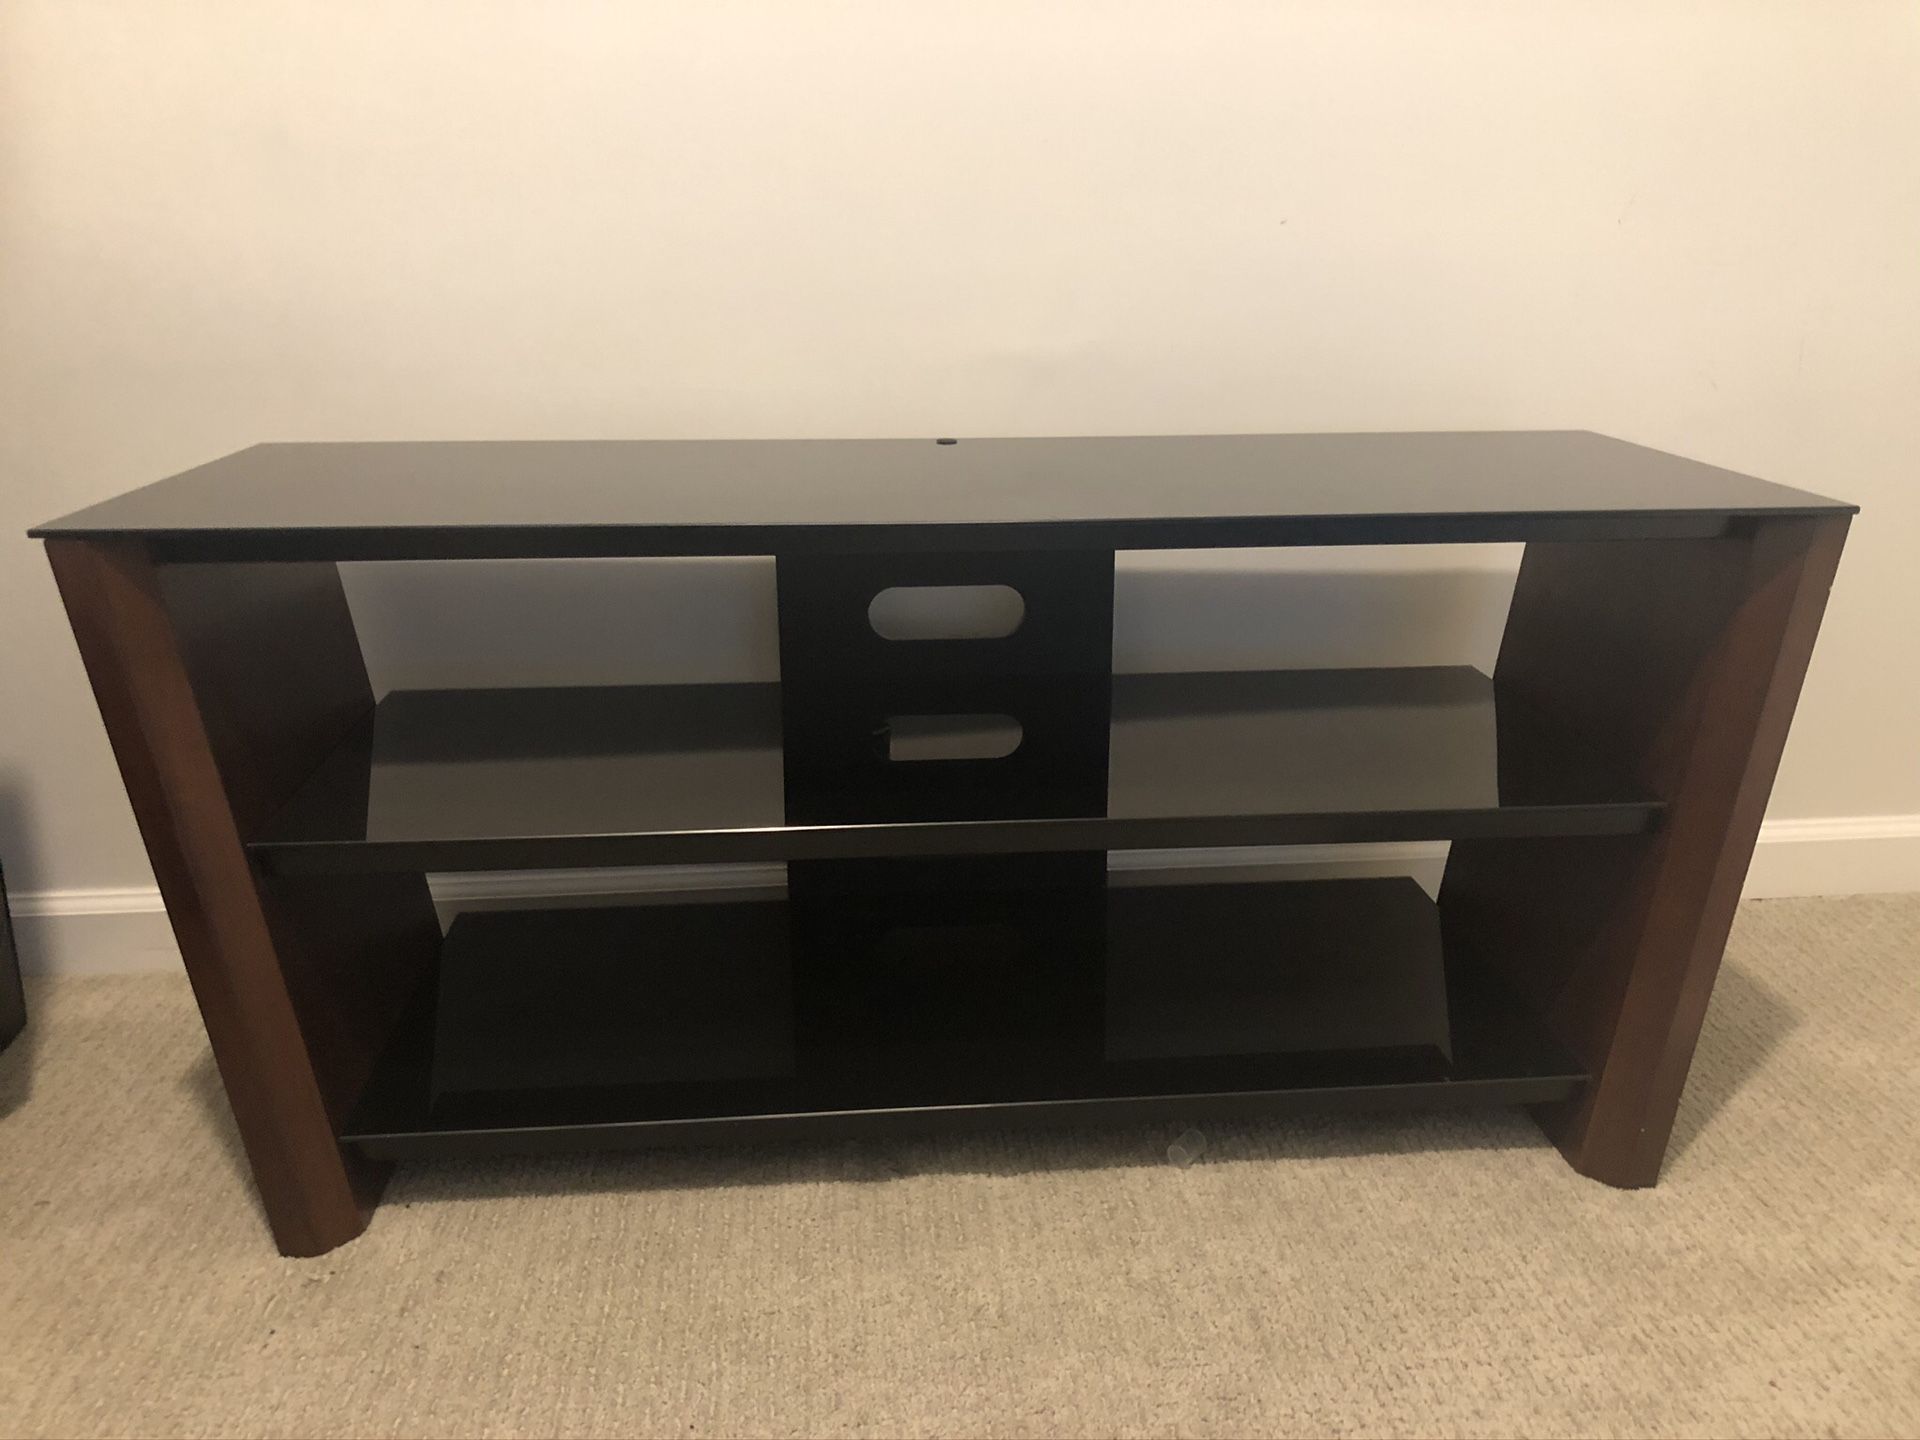 Wood and Glass TV Stand